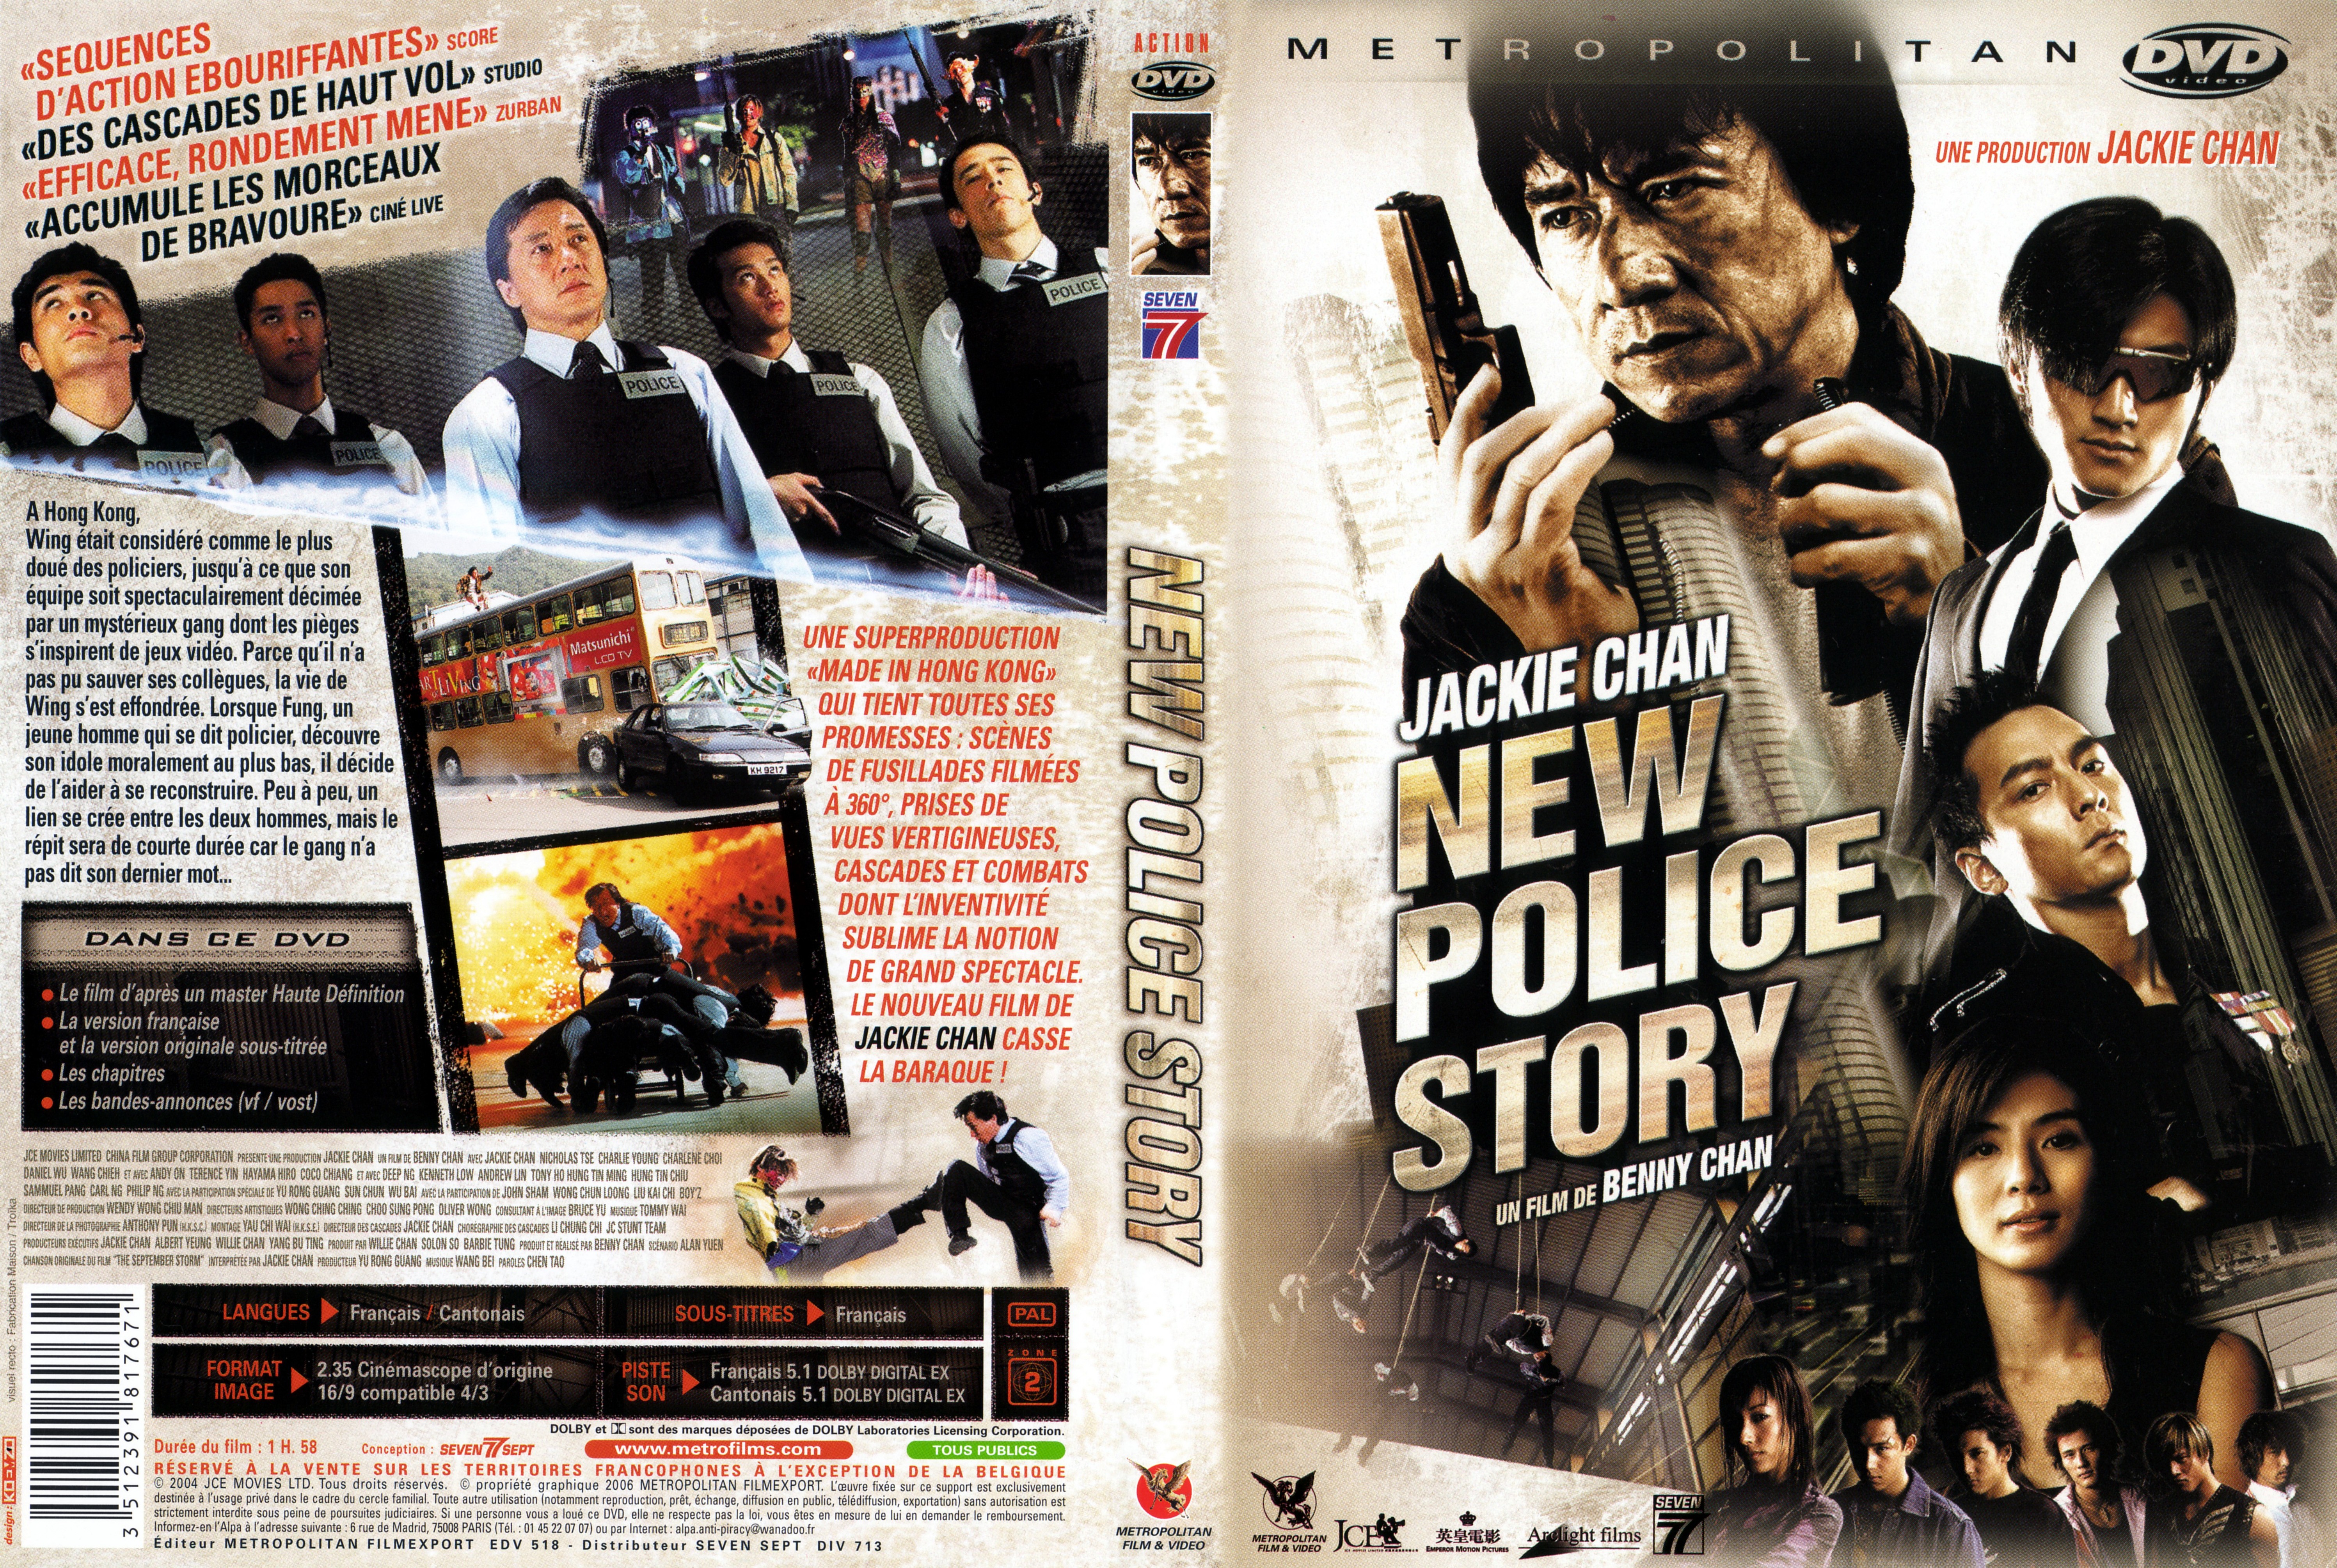 Jaquette DVD New police story v5